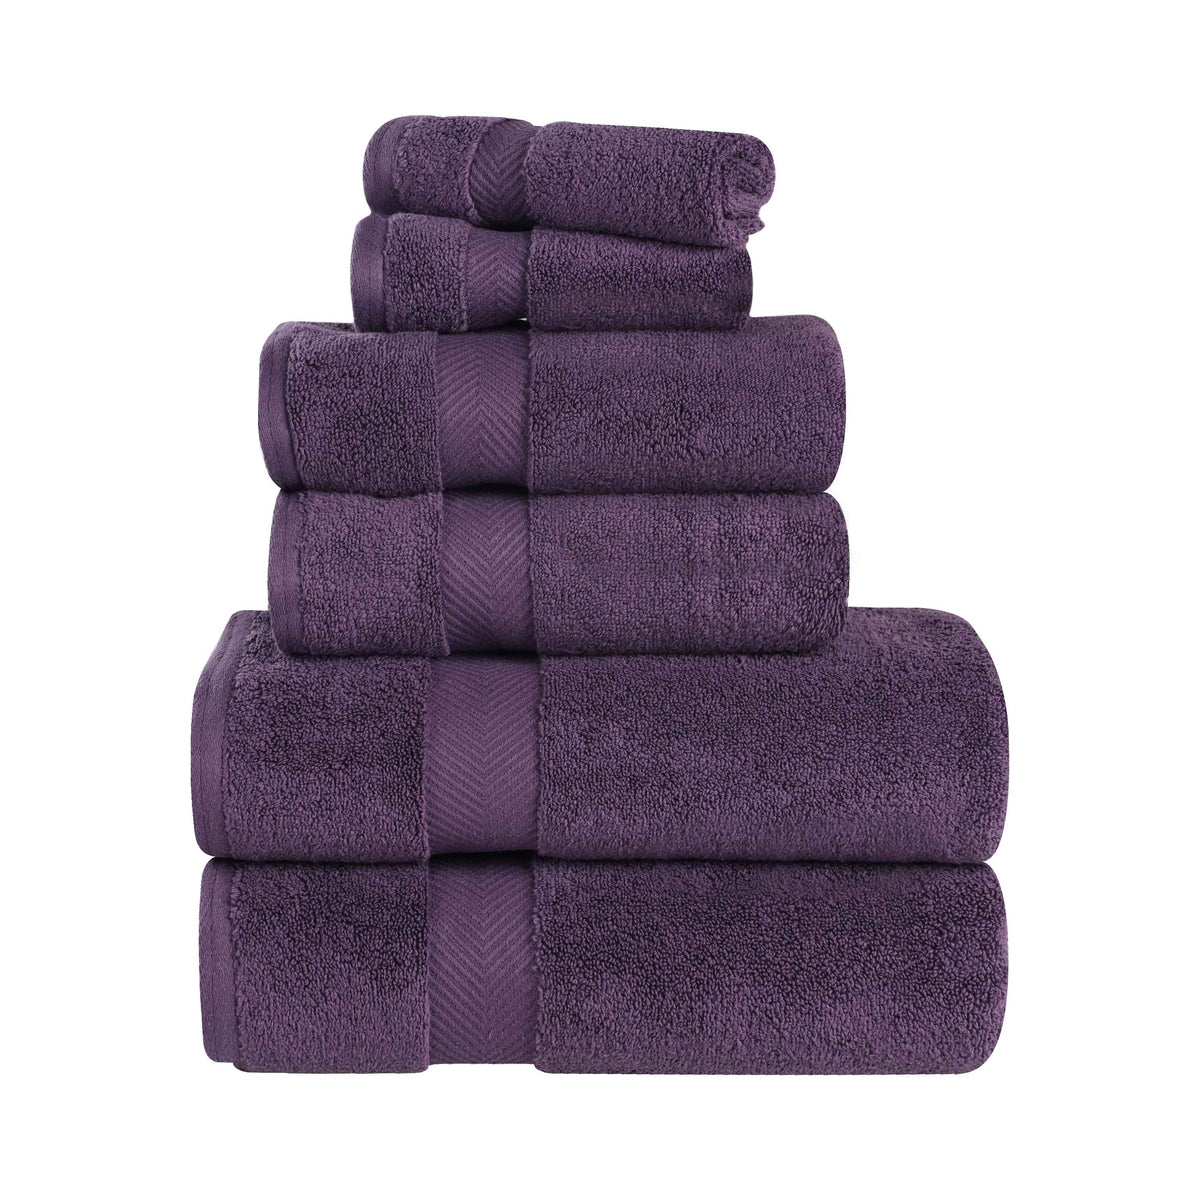 Zero-Twist Cotton Quick-Drying Absorbent Assorted 6 Piece Towel Set - Grapeseed